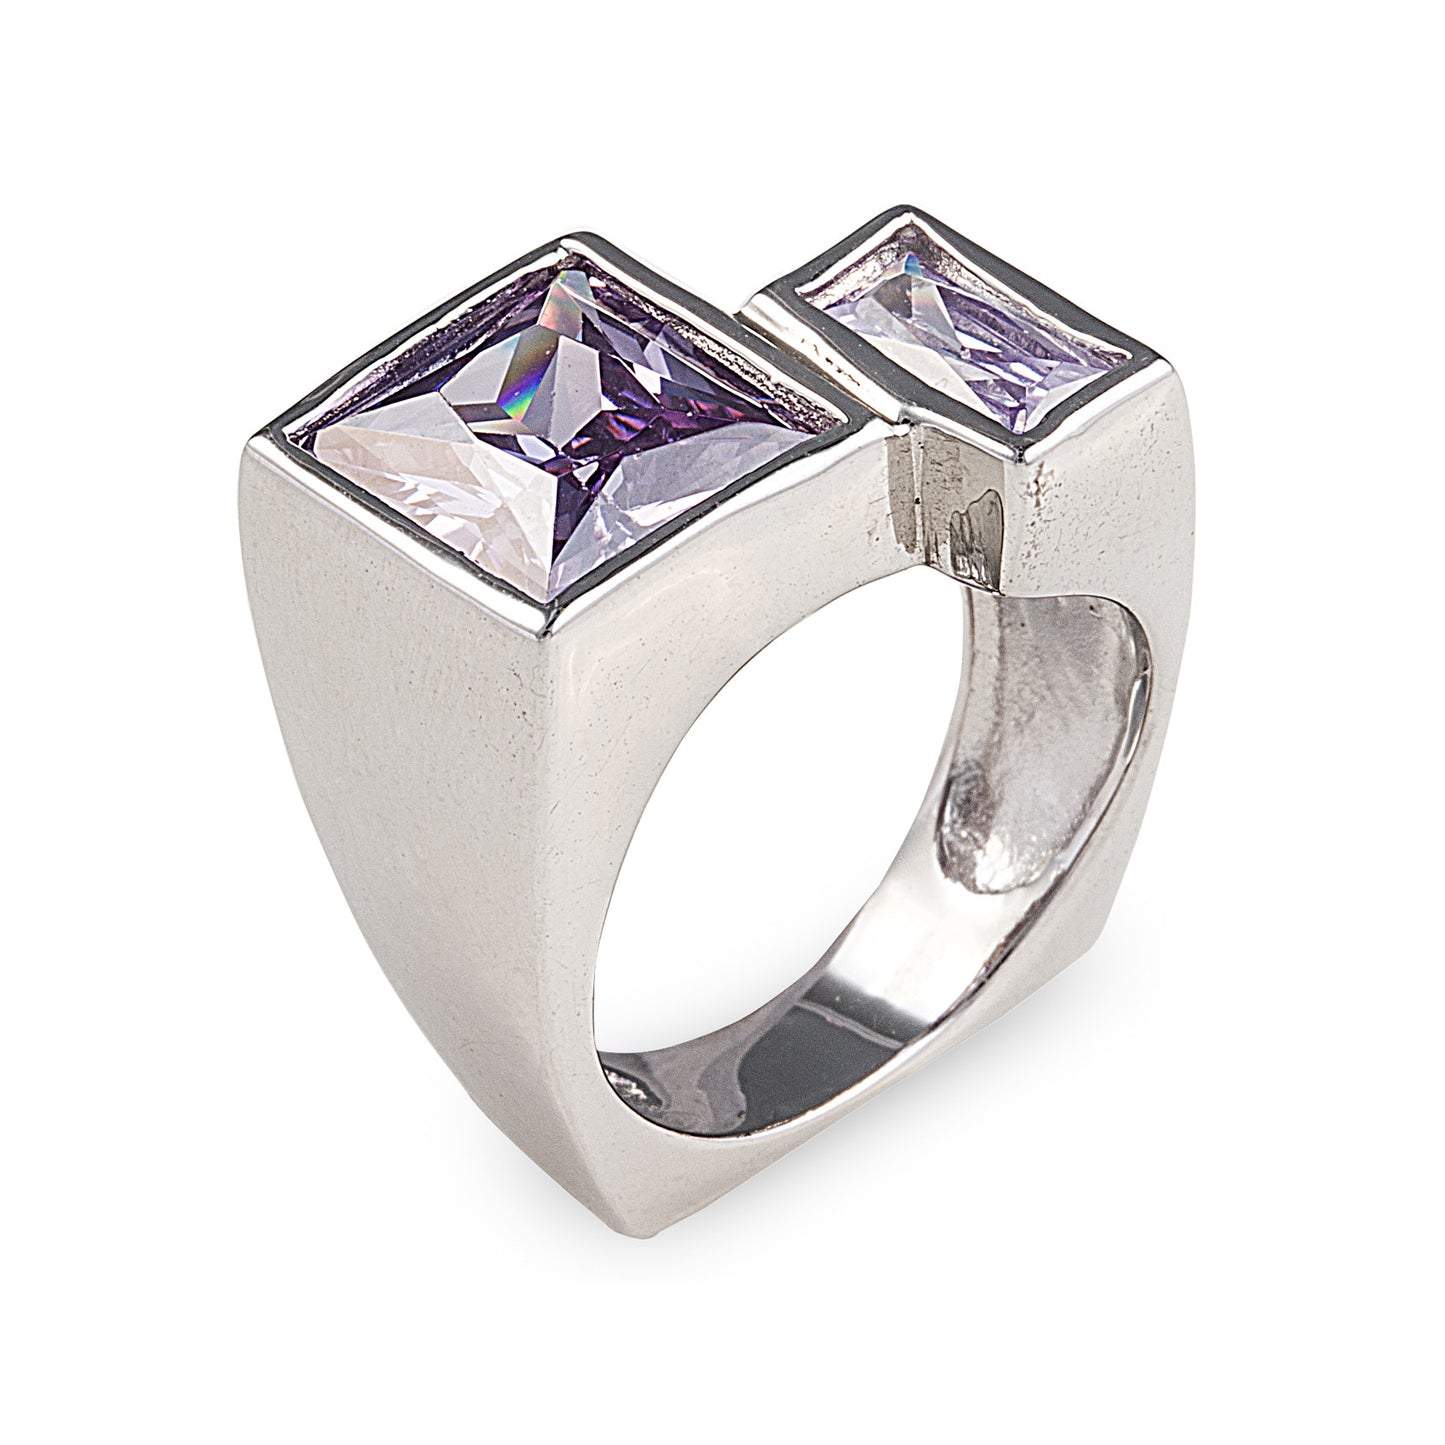 Amalfi Ring in 925 Sterling Silver featuring two purple princess cut stones set into a modern asymmetric design. Worldwide shipping. Jewellery by Bellagio & Co.